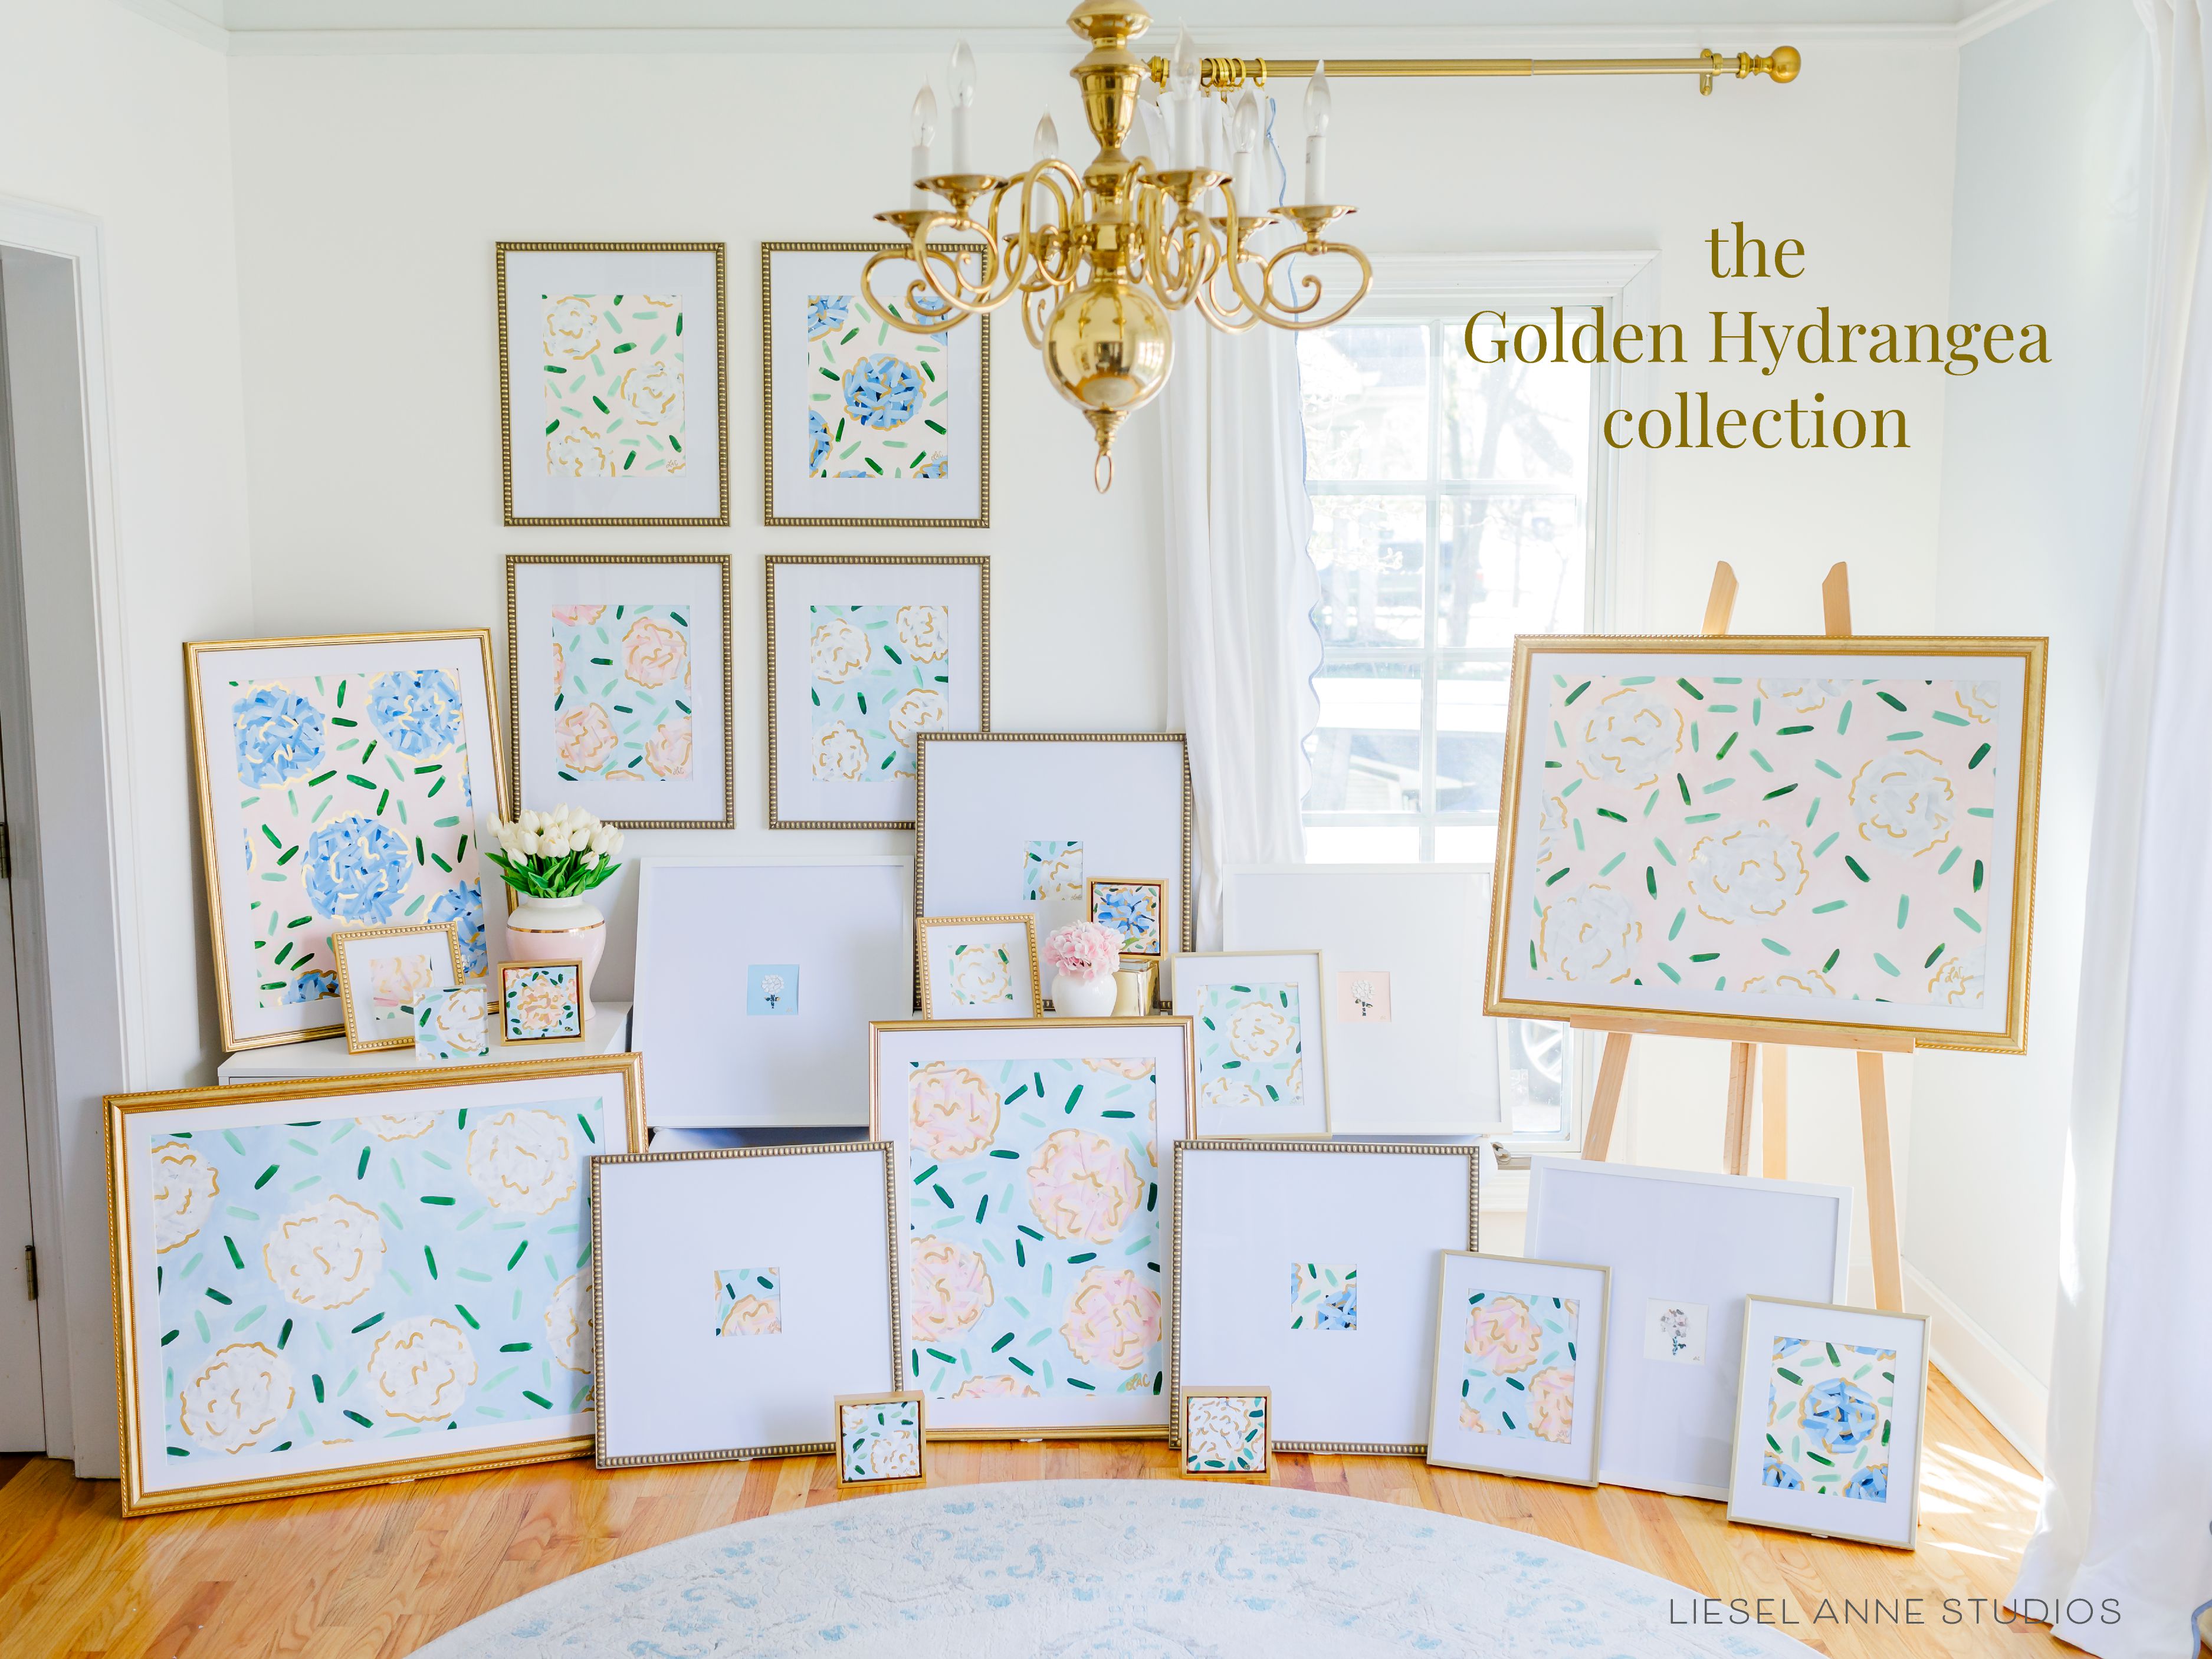 Golden Hydrangea Mini | Blue & Pink XXII-Original artwork measures 5"x5" | Hand-Painted with gouache on cold press watercolor paper | Matted and framed in gold wood frame sized 20"x20" | Glare-resistant glass | Hanging hardware included | Features our signature Golden Hydrangea design with a light blue base, pink hydrangeas and shimmery gold accents | Initialed in gold by the Liesel Anne (the artist) on the front and signed and dated on the back.-The Singing Little Bird